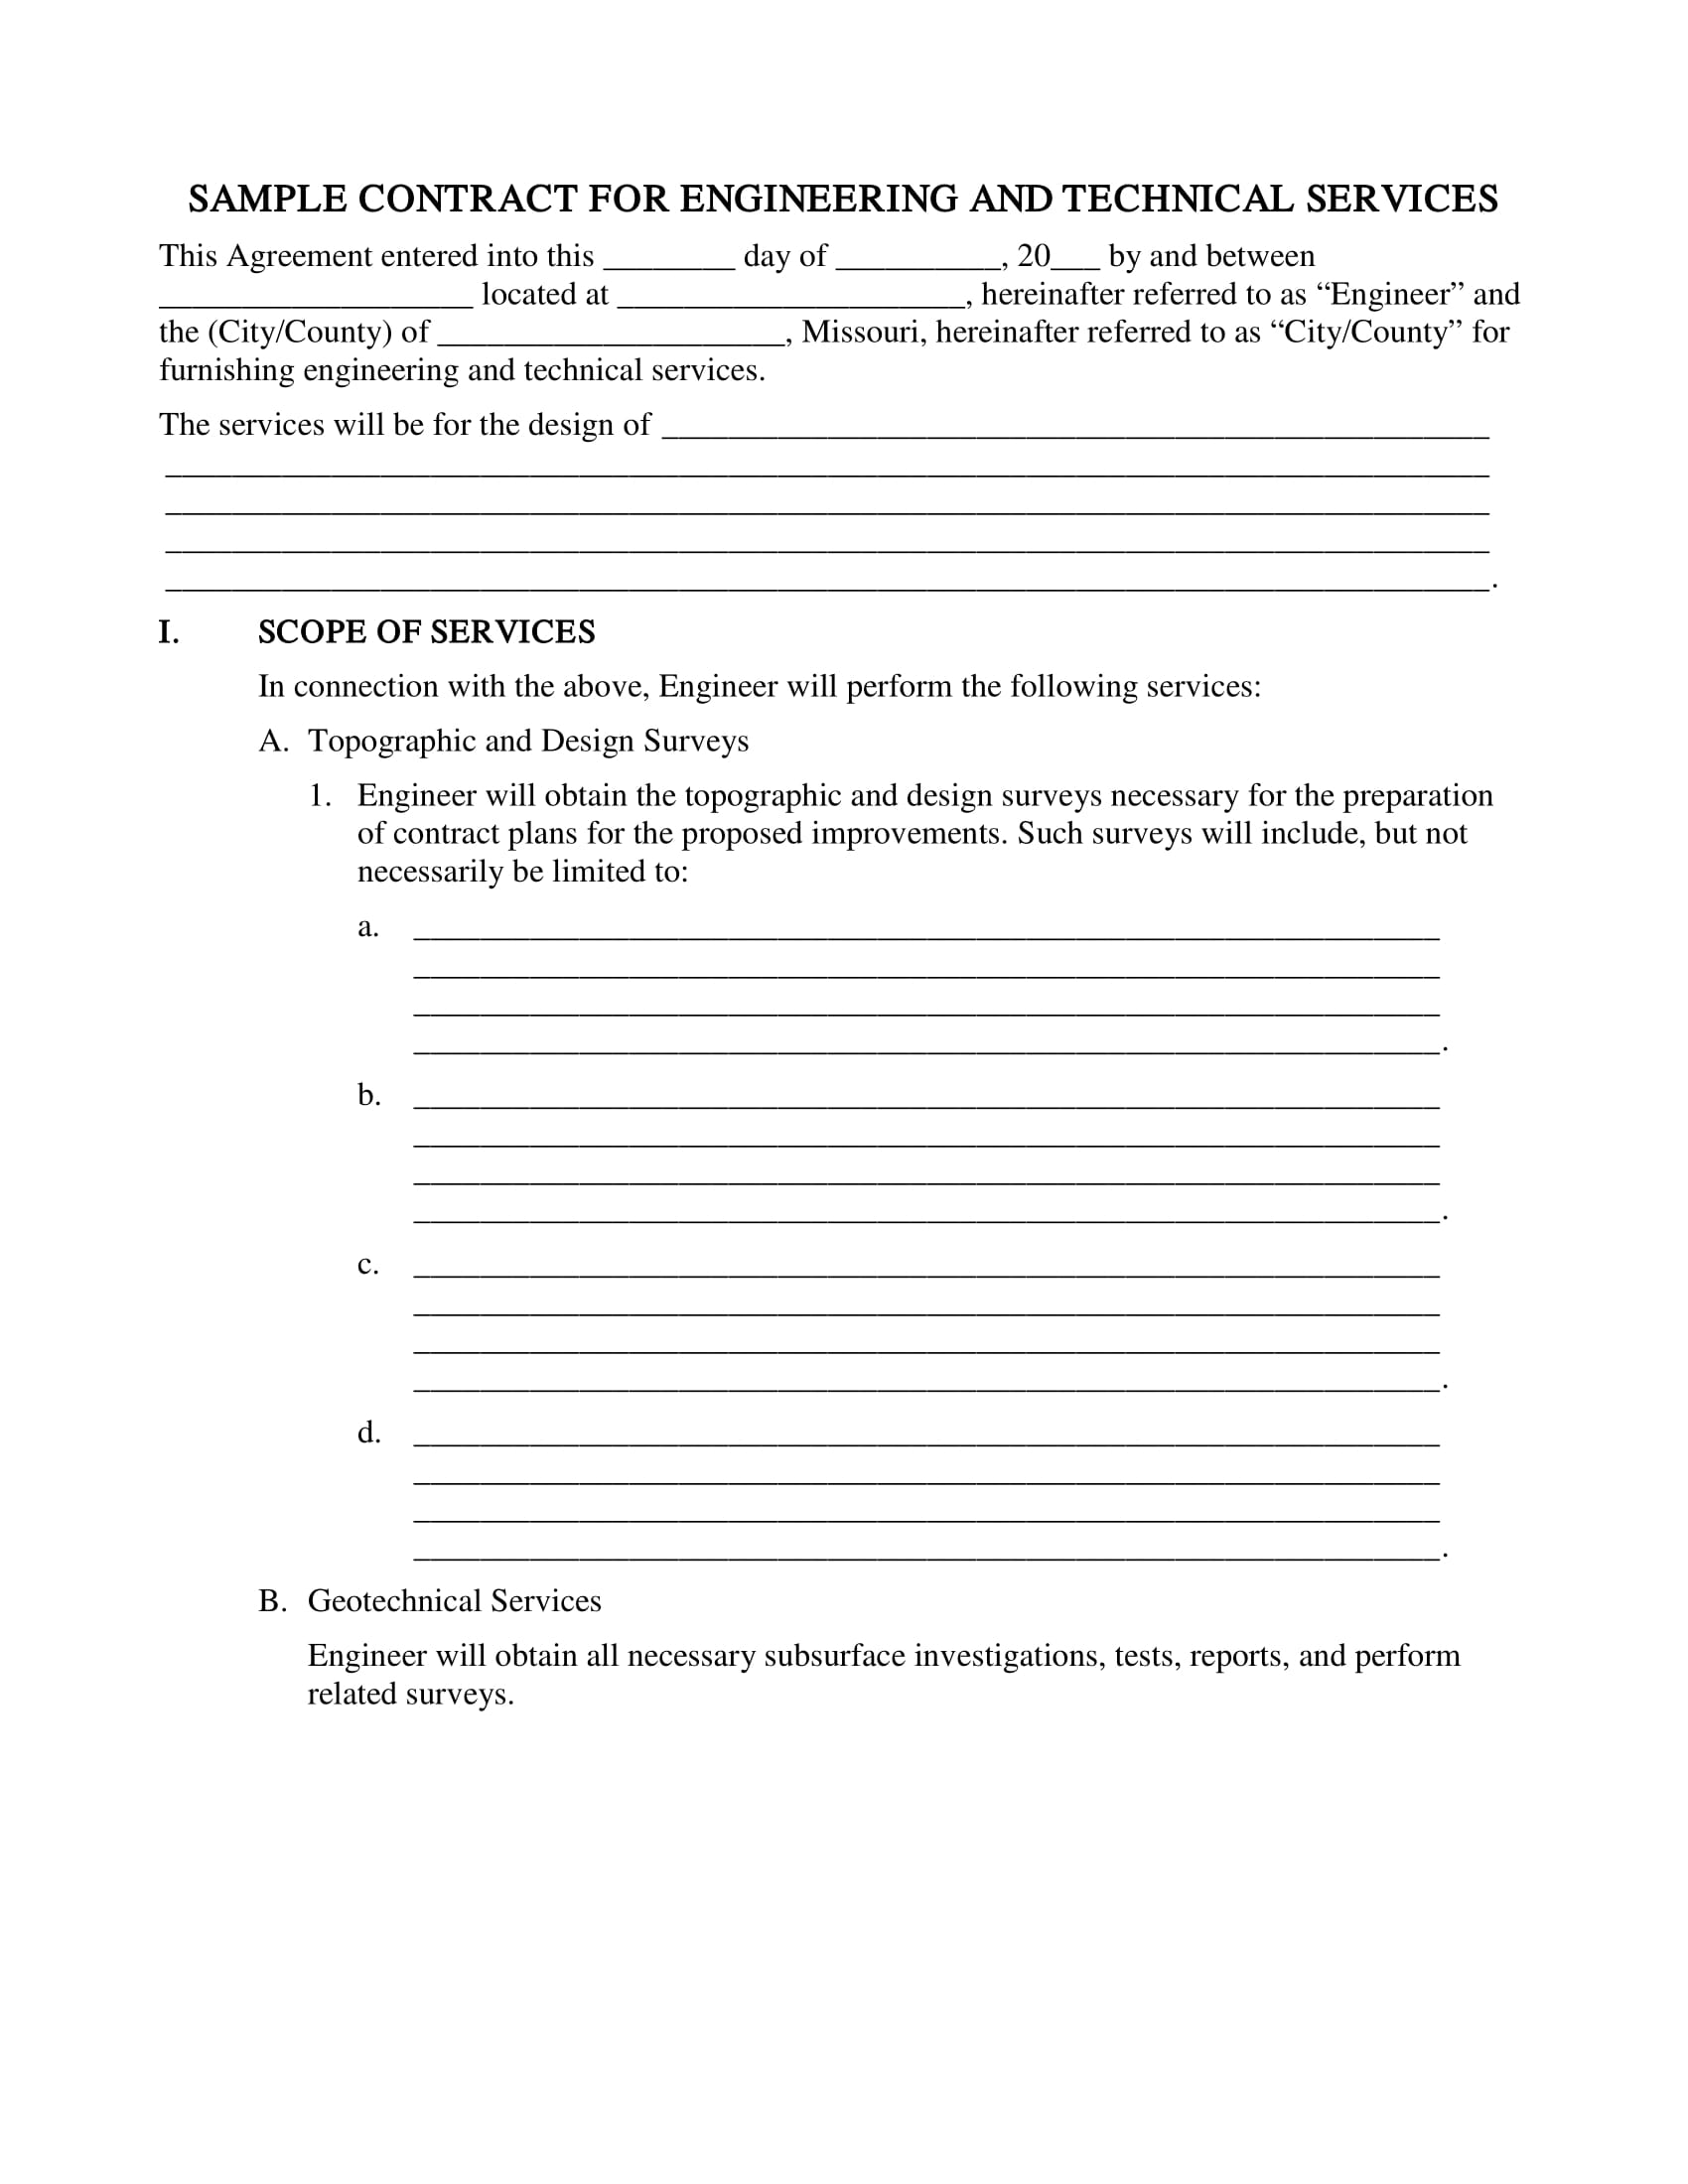 engineering electrical and technical services agreement contract template example 01